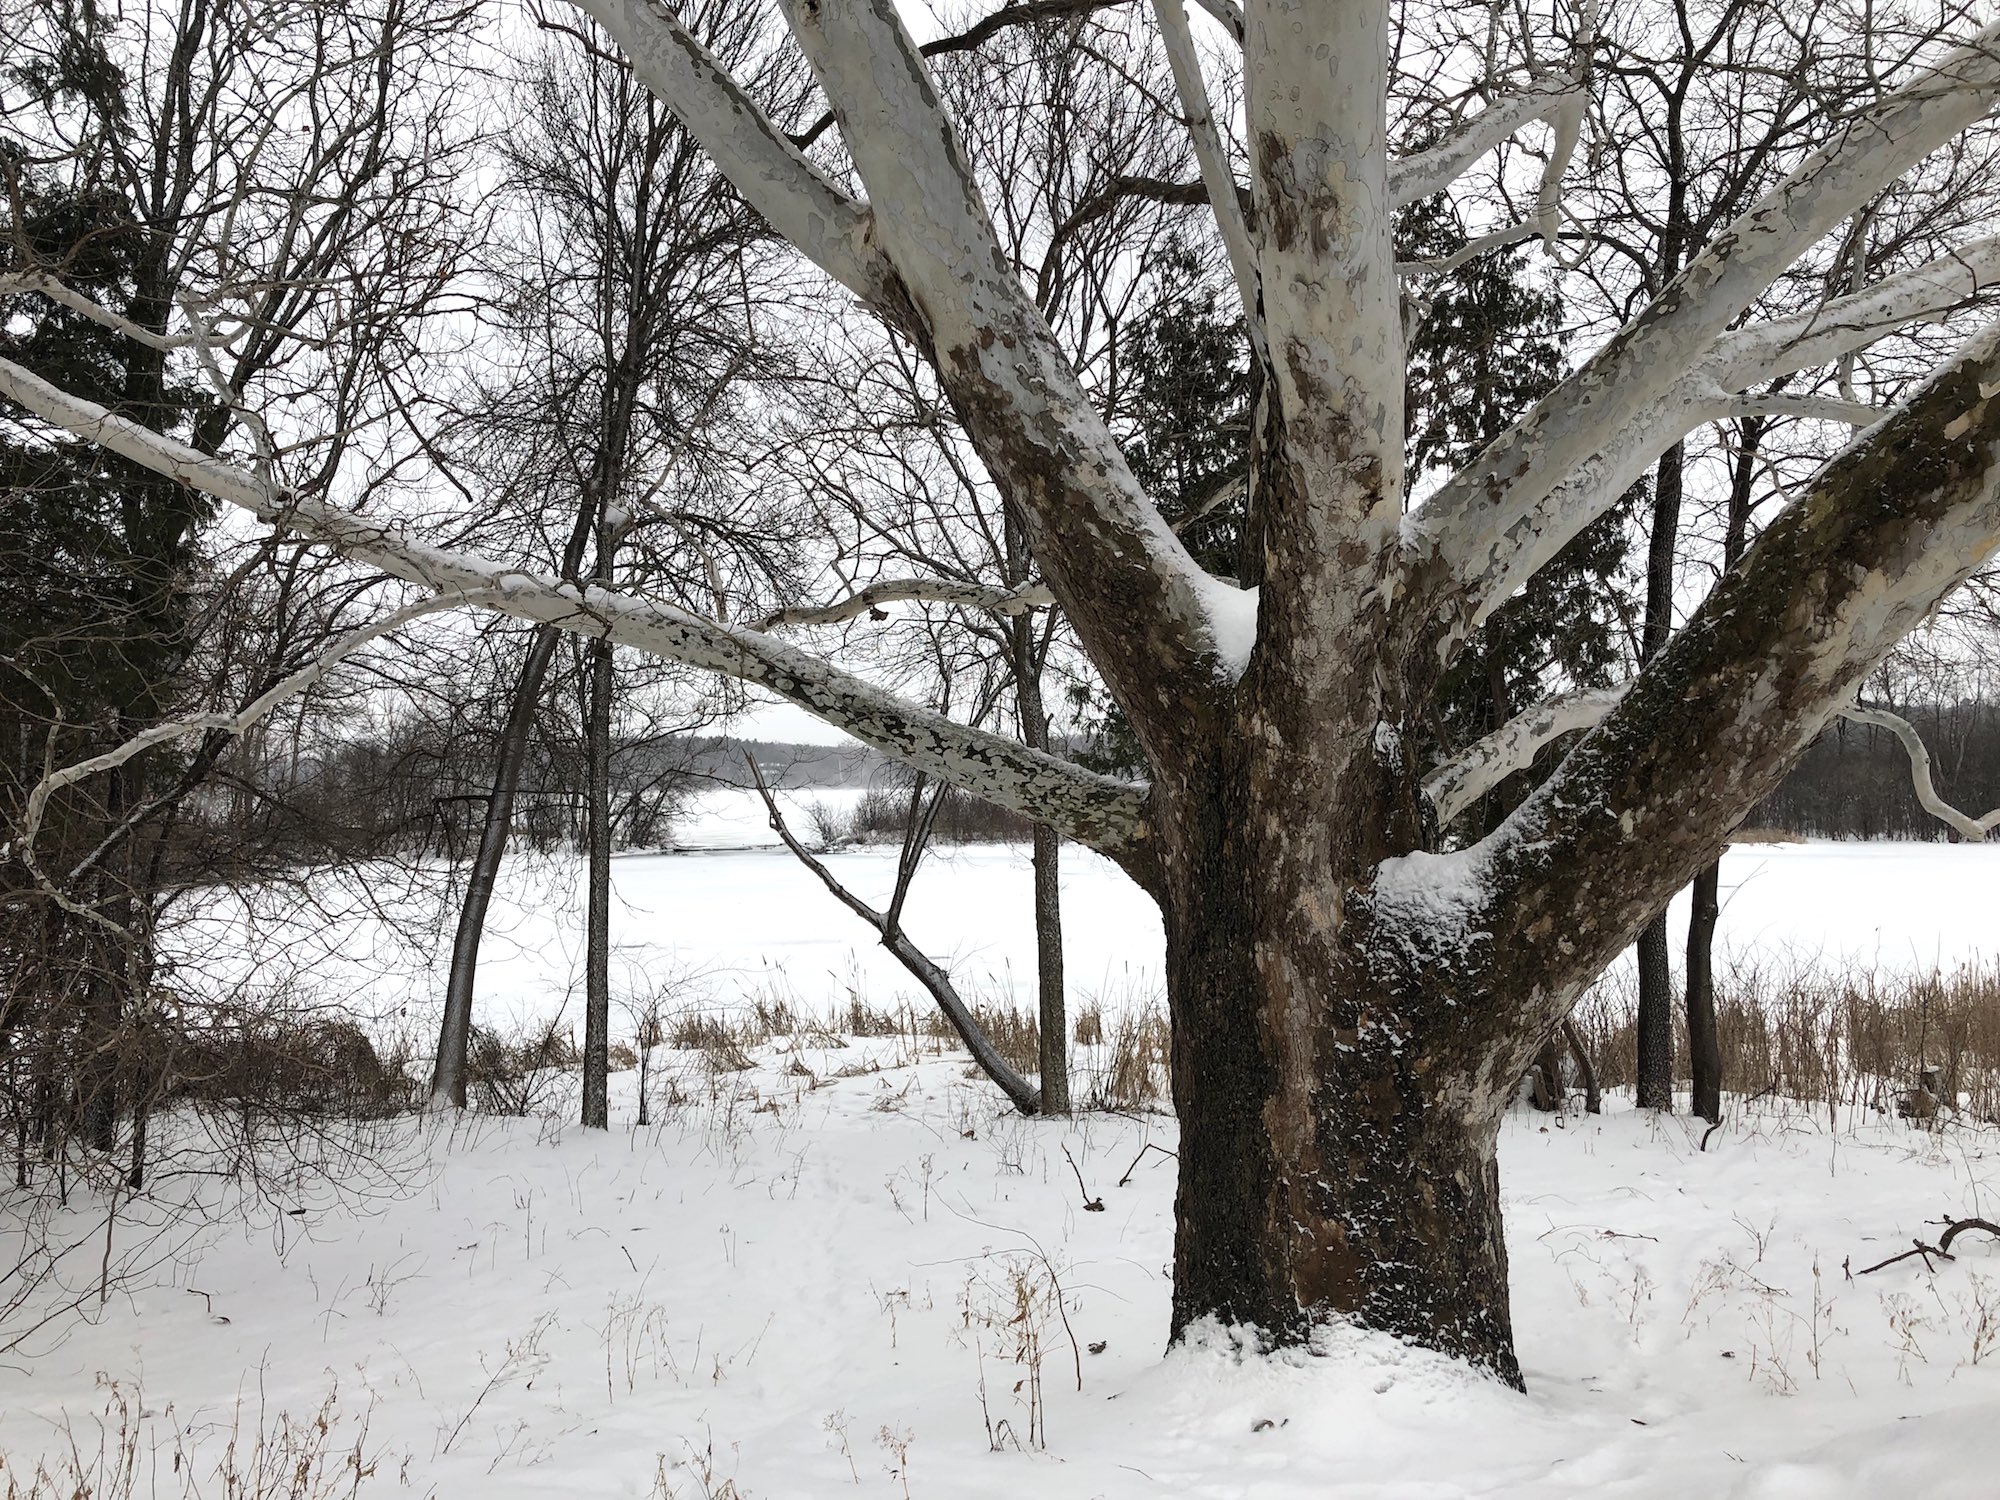 Sycamore tree between Ho-Nee-Um Pond and Arbor Drive on north shore of Lake Wingra on February 24, 2019.